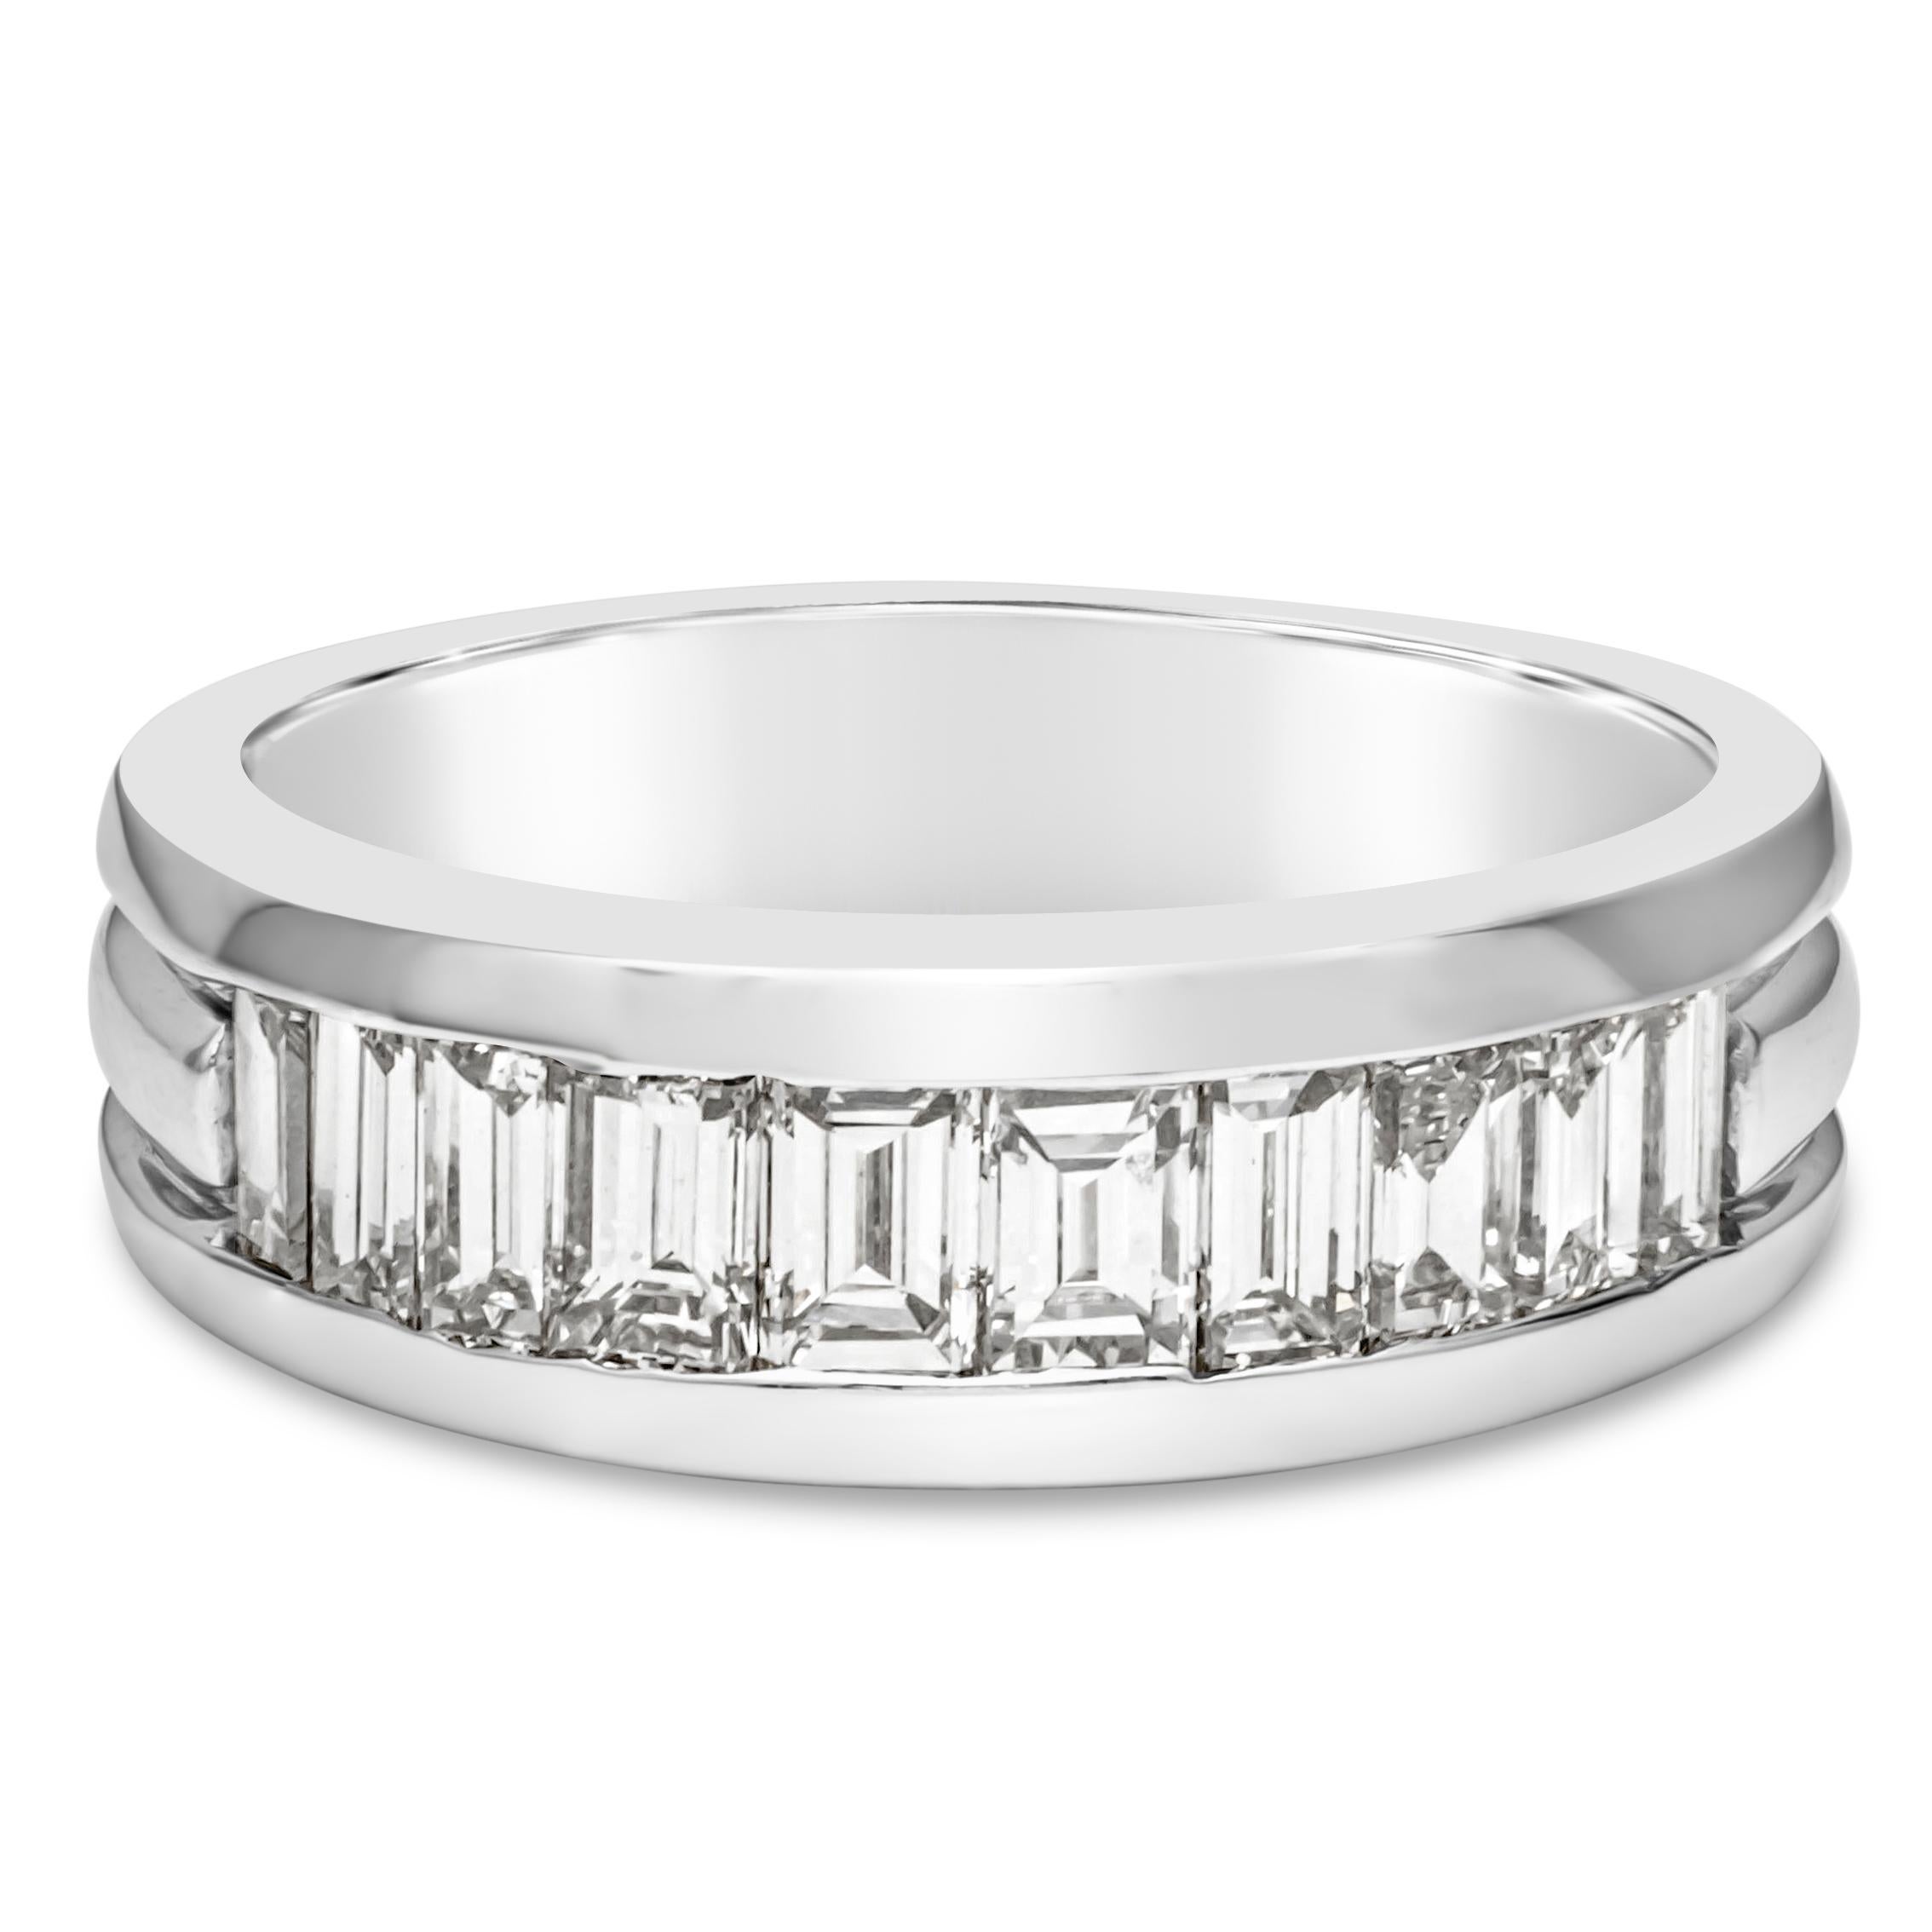 A subtle yet distinctive men's wide wedding band showcasing 10 baguette cut diamonds weighing 2.50 carats total, mounted in a half-way channel setting. Finely made in 18k white gold and Size 11.5 US resizable upon request. 8.09 mm in width.

Style